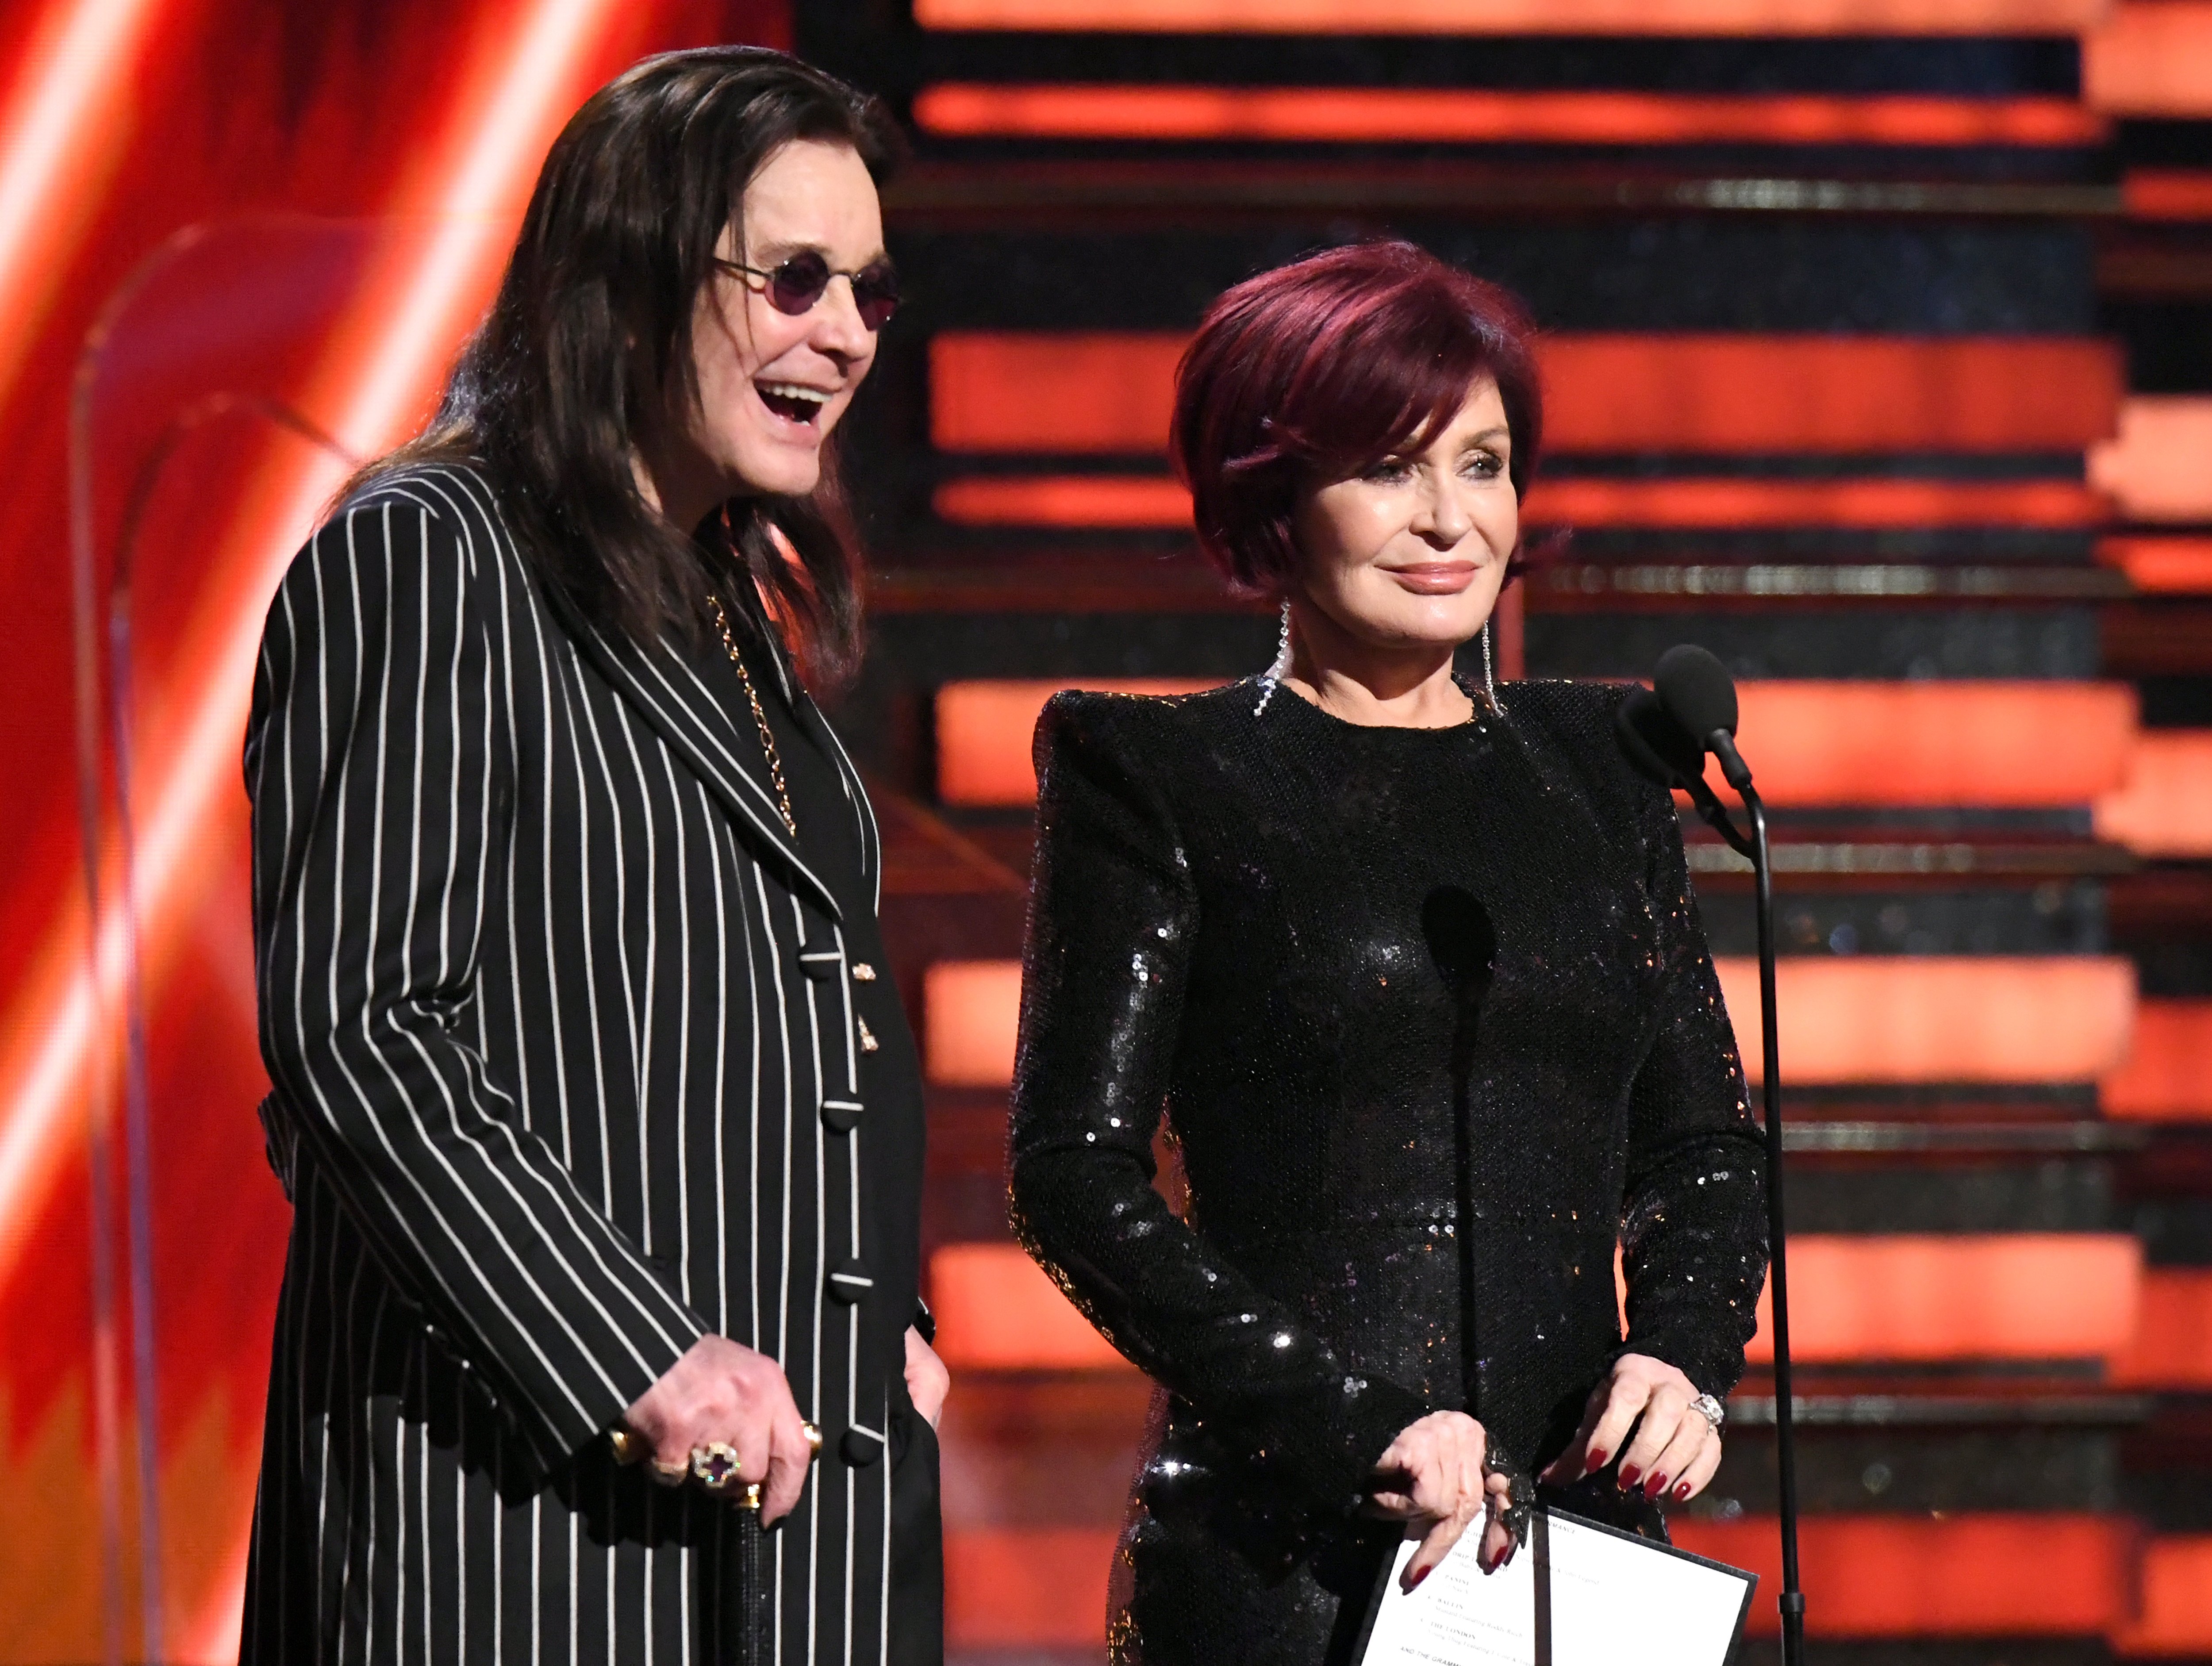 Ozzy Osbourne and his wife Sharon Osbourne speak onstage during the 62nd Annual Grammy Awards at Staples Center on January 26, 2020, in Los Angeles, California. | Source: Getty Images